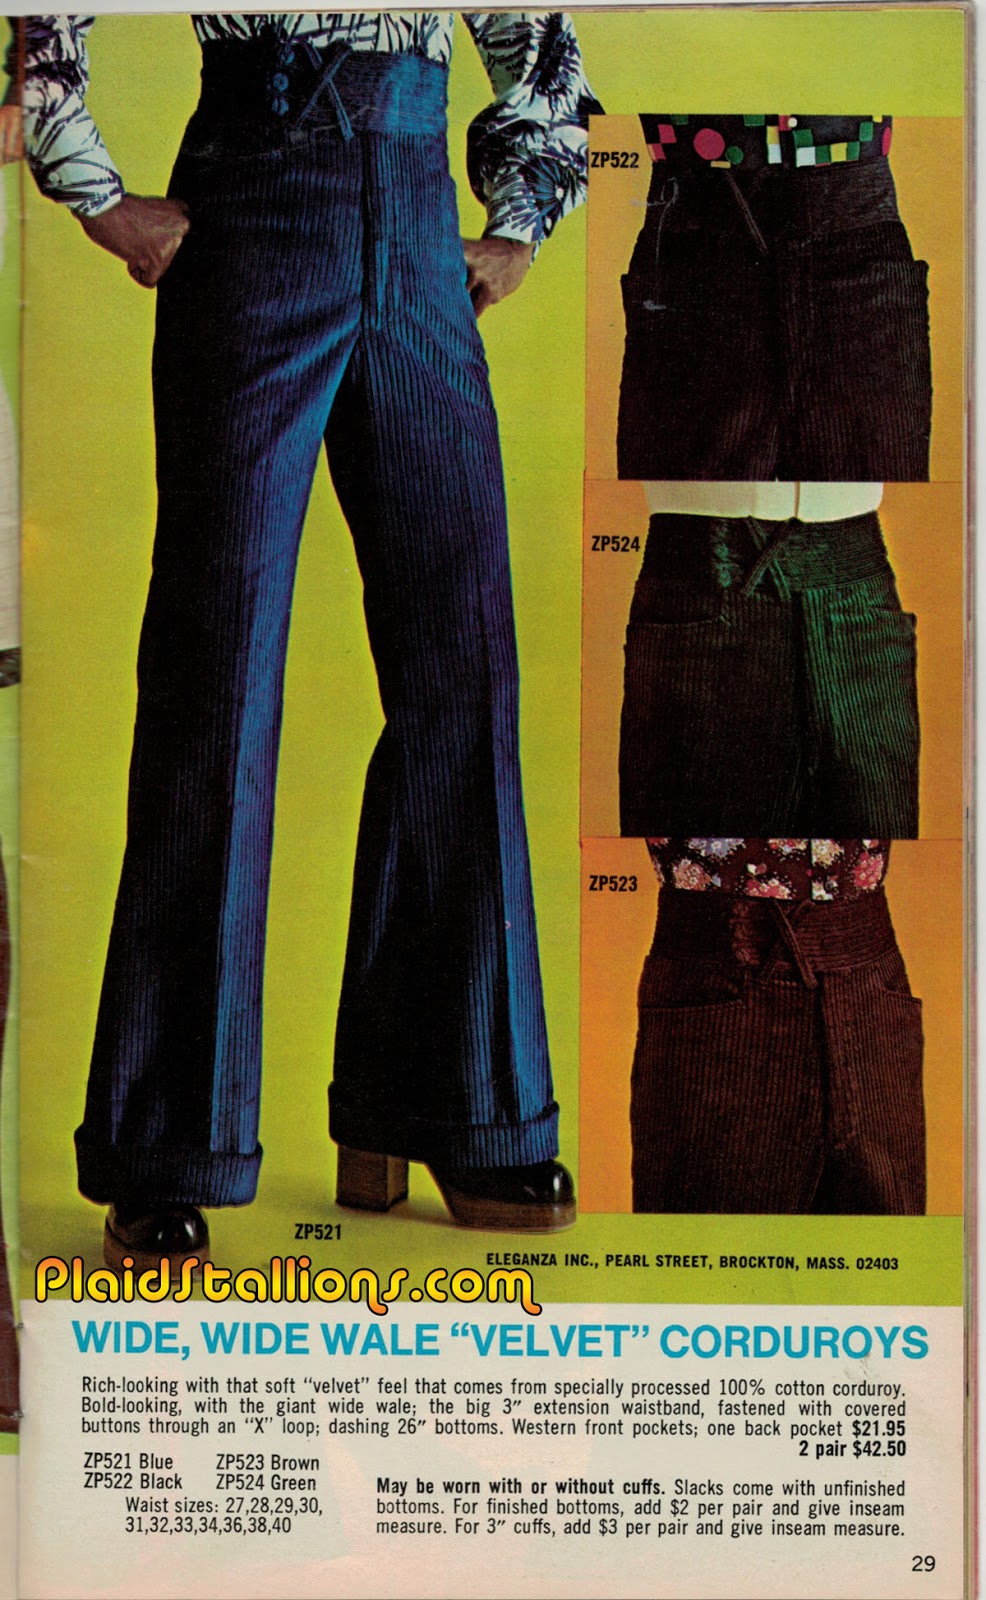 Plaid Stallions : Rambling and Reflections on '70s pop culture: Wide ...